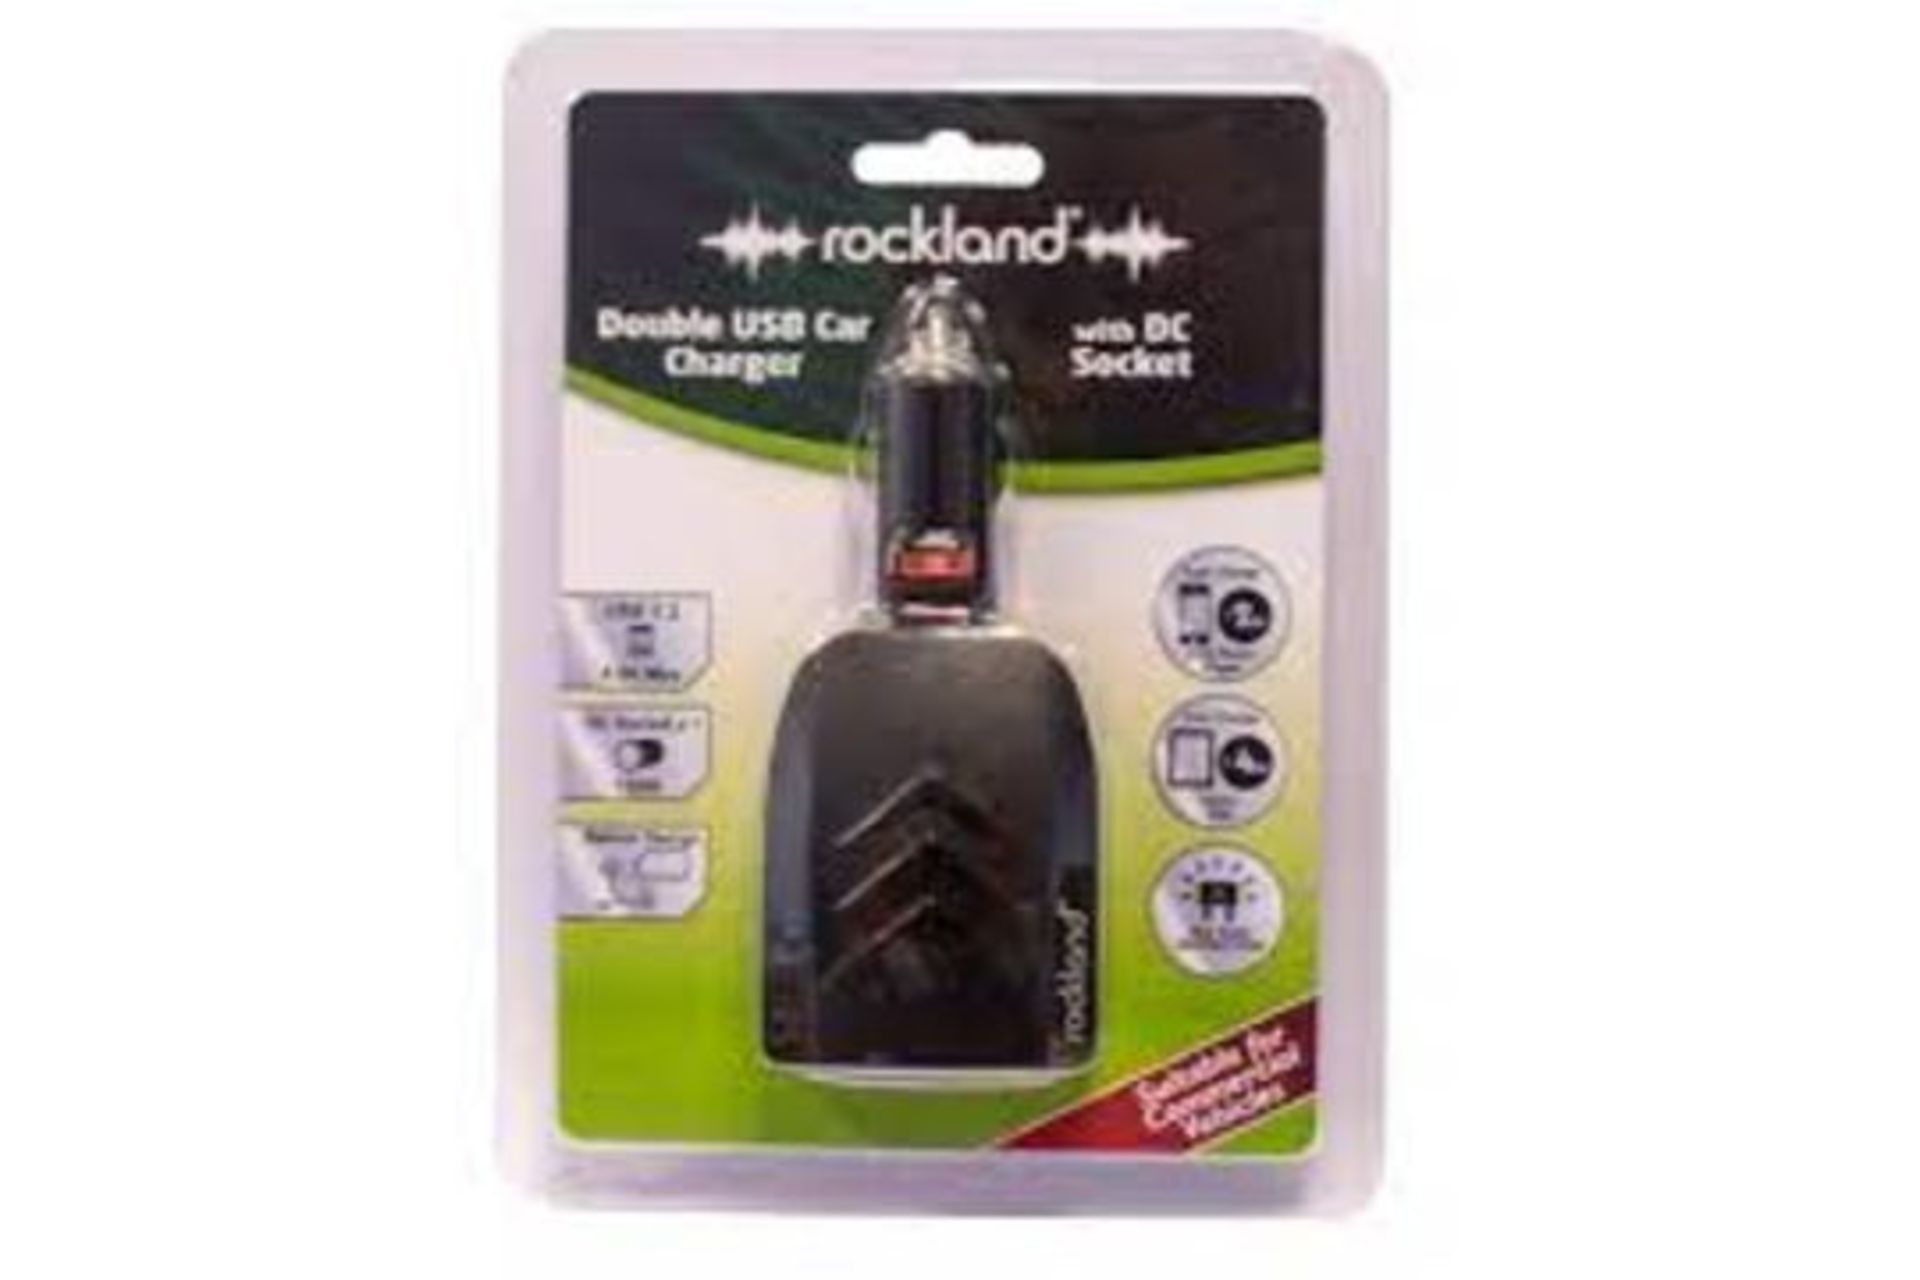 48 X NEW SEALED ROCKLAND RDC003 DOUBLE USB CAR CHARGER WITH DC SOCKETS. RRP £14.99 EACH. Suitable